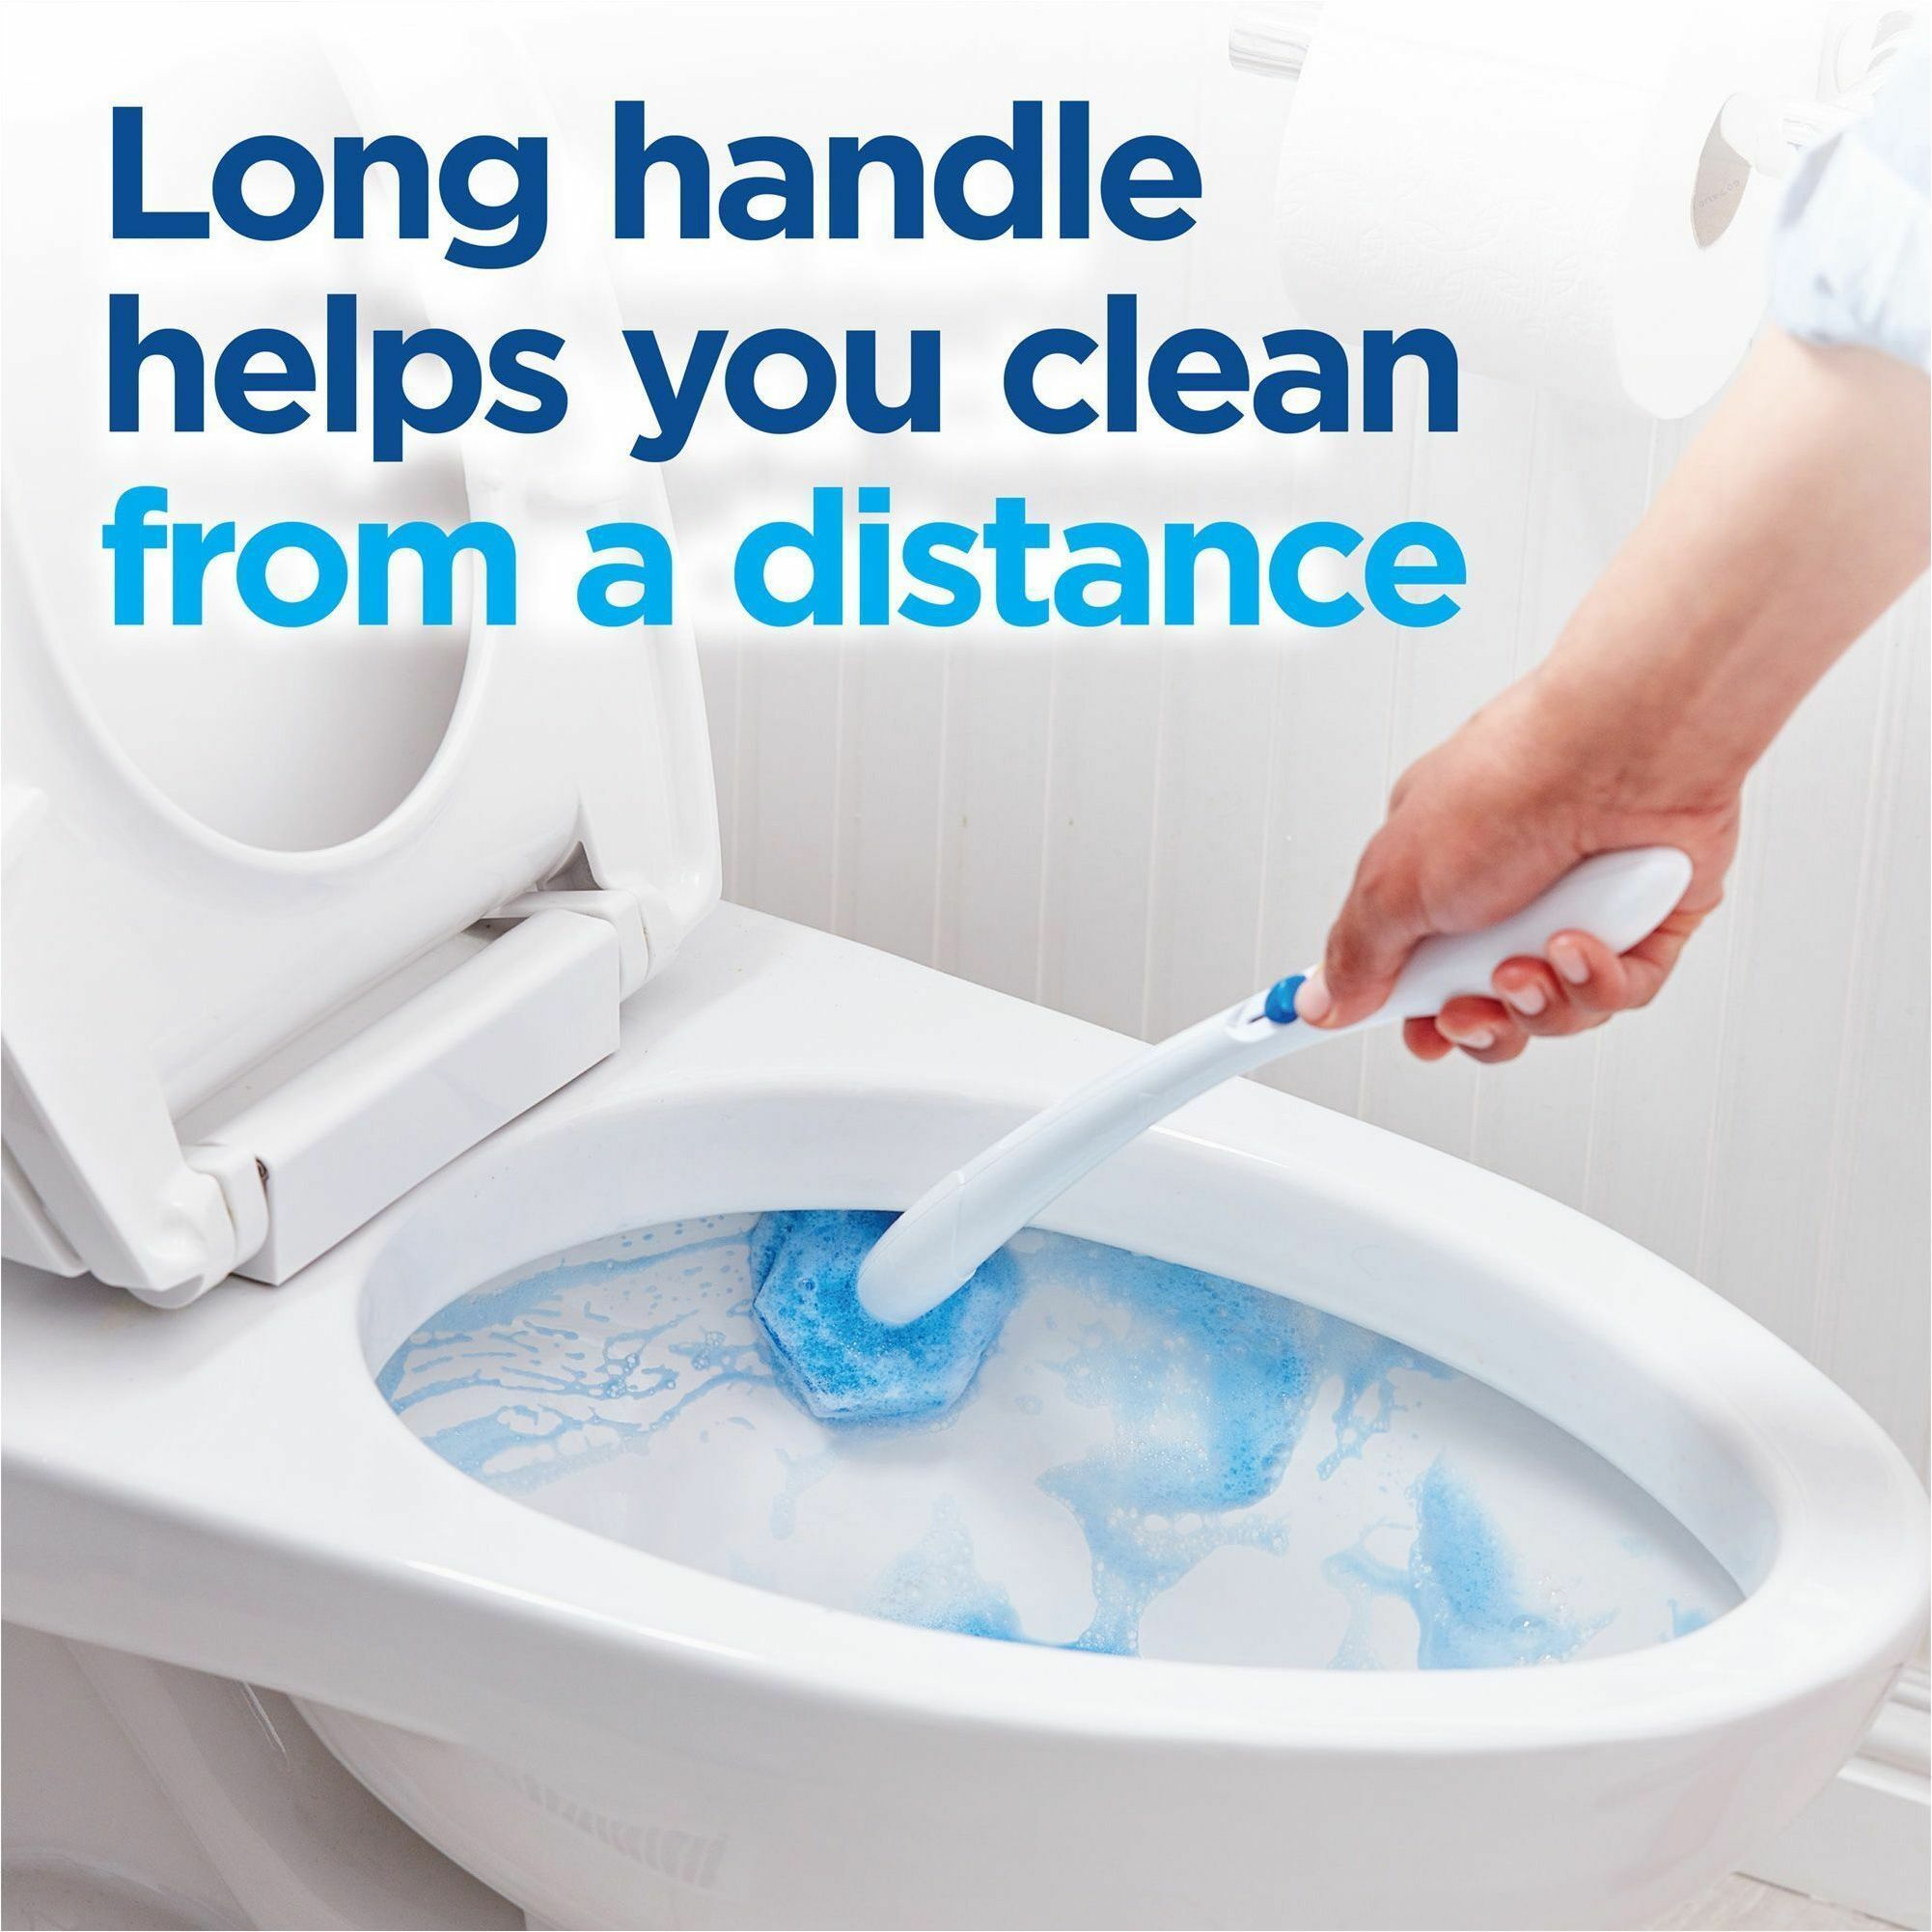 Clorox ToiletWand Disposable Toilet Cleaning System (COX03191